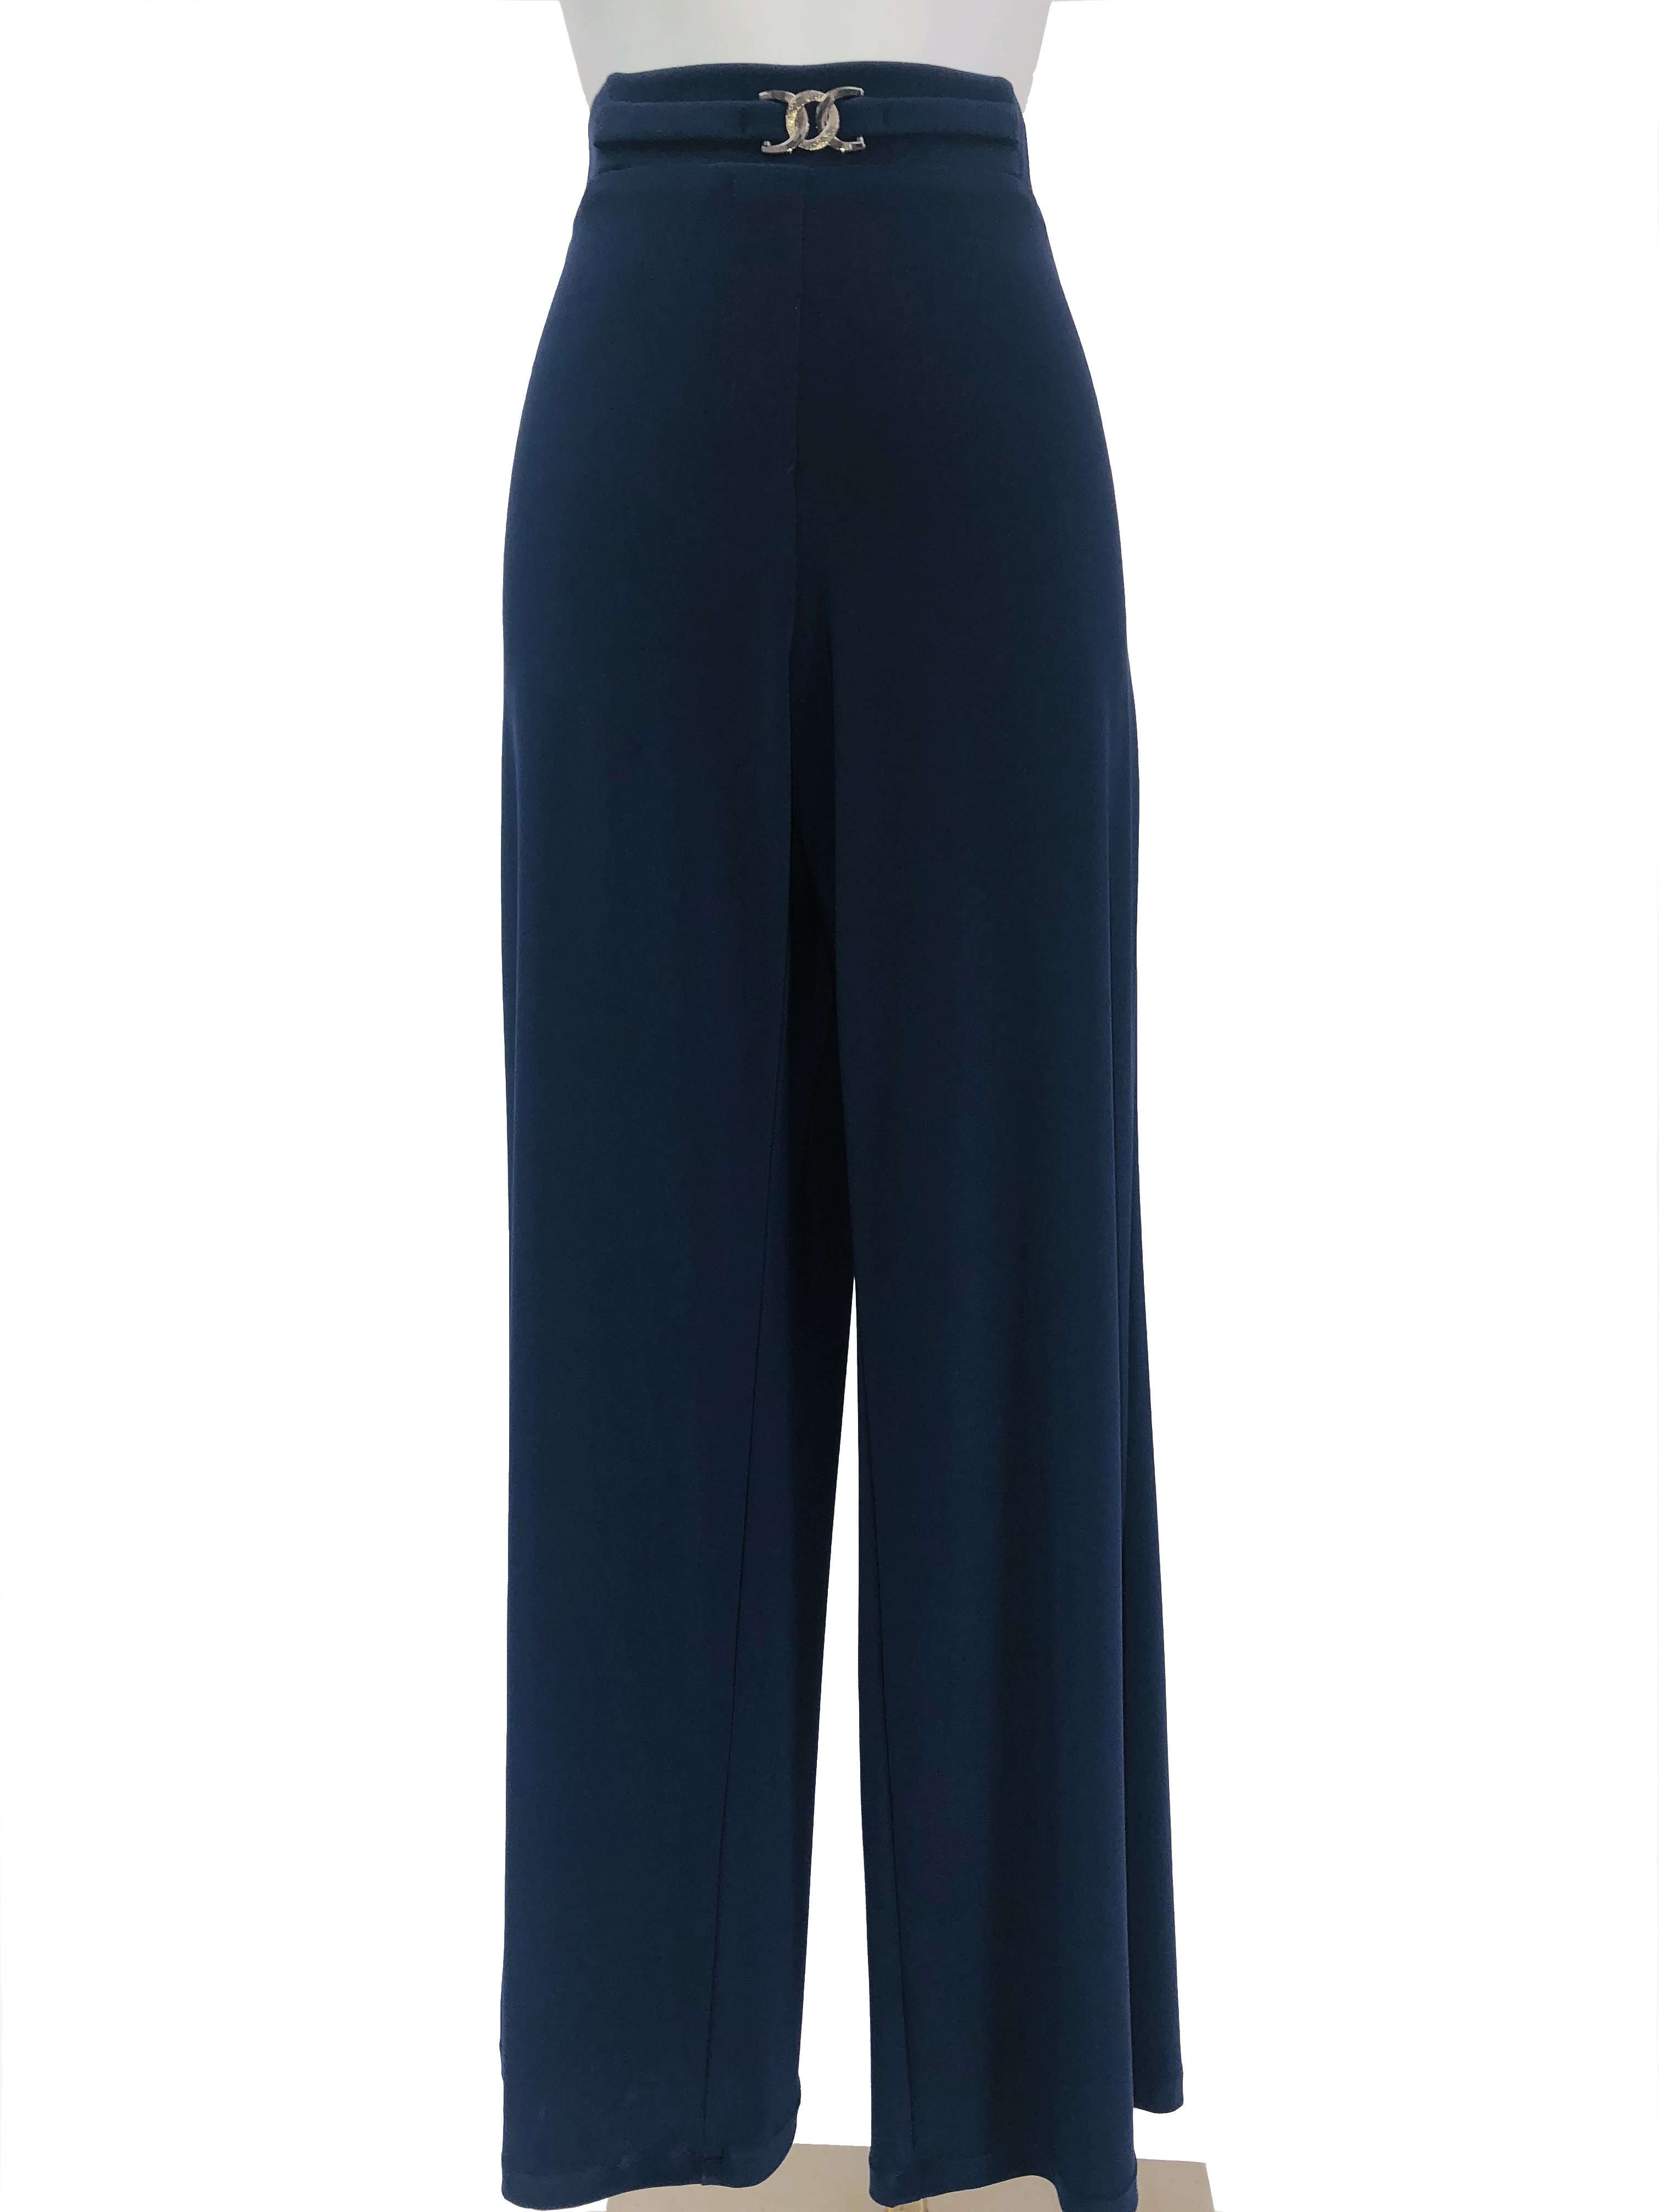 Women's Pants Navy &quot;Magic Pants &quot; Our Best Seller Comfort and Style Quality Made in Canada Travel Friendly Navy Pants - Yvonne Marie - Yvonne Marie